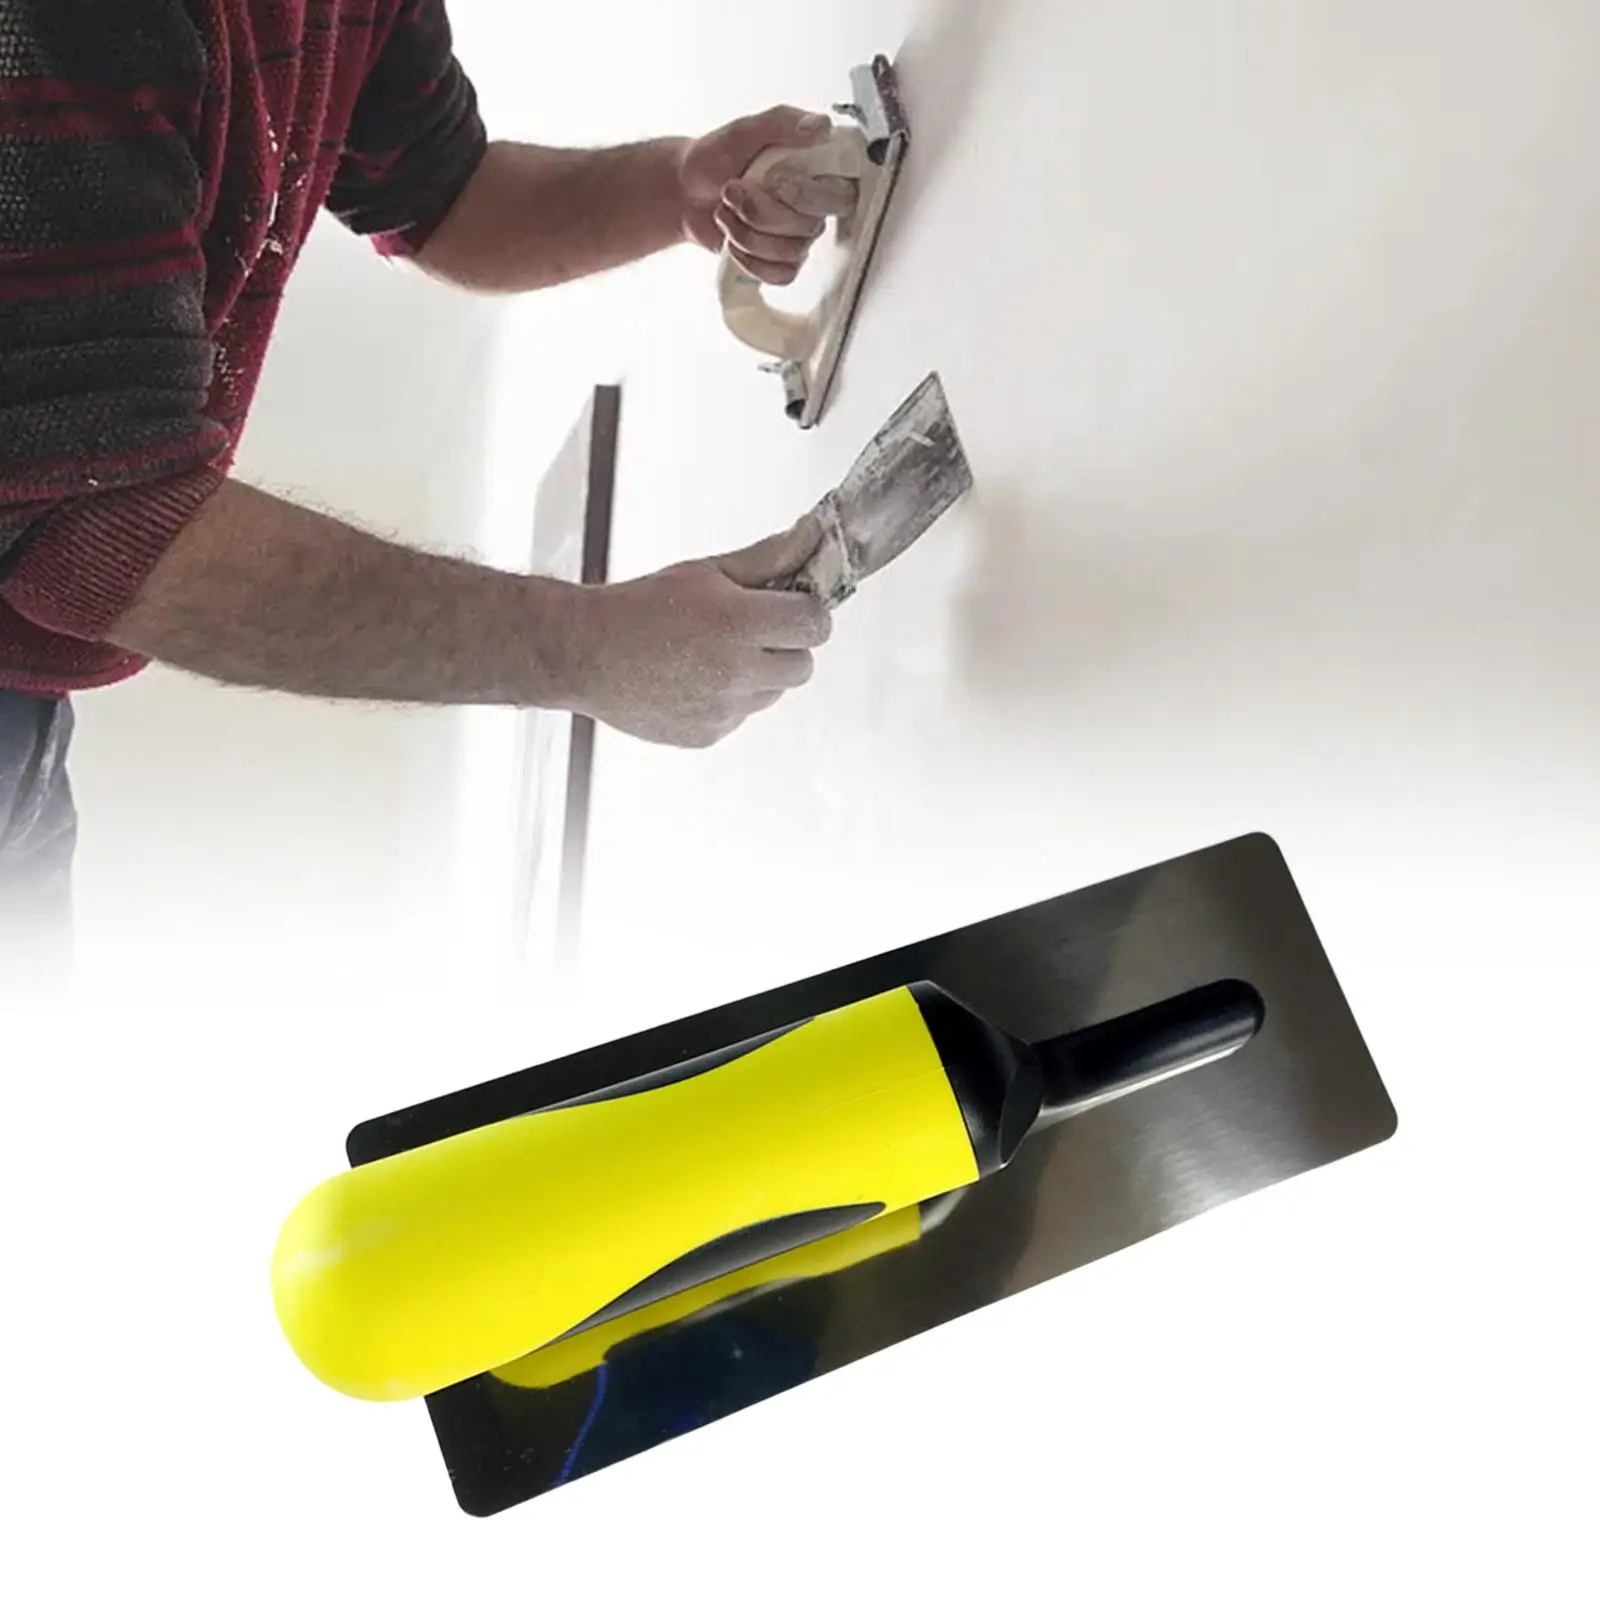 Finisher Plastering Trowel Household Knife Scraper Stainless Steel for Wall Decoration Removing Wallpaper Drywall Filling Cement